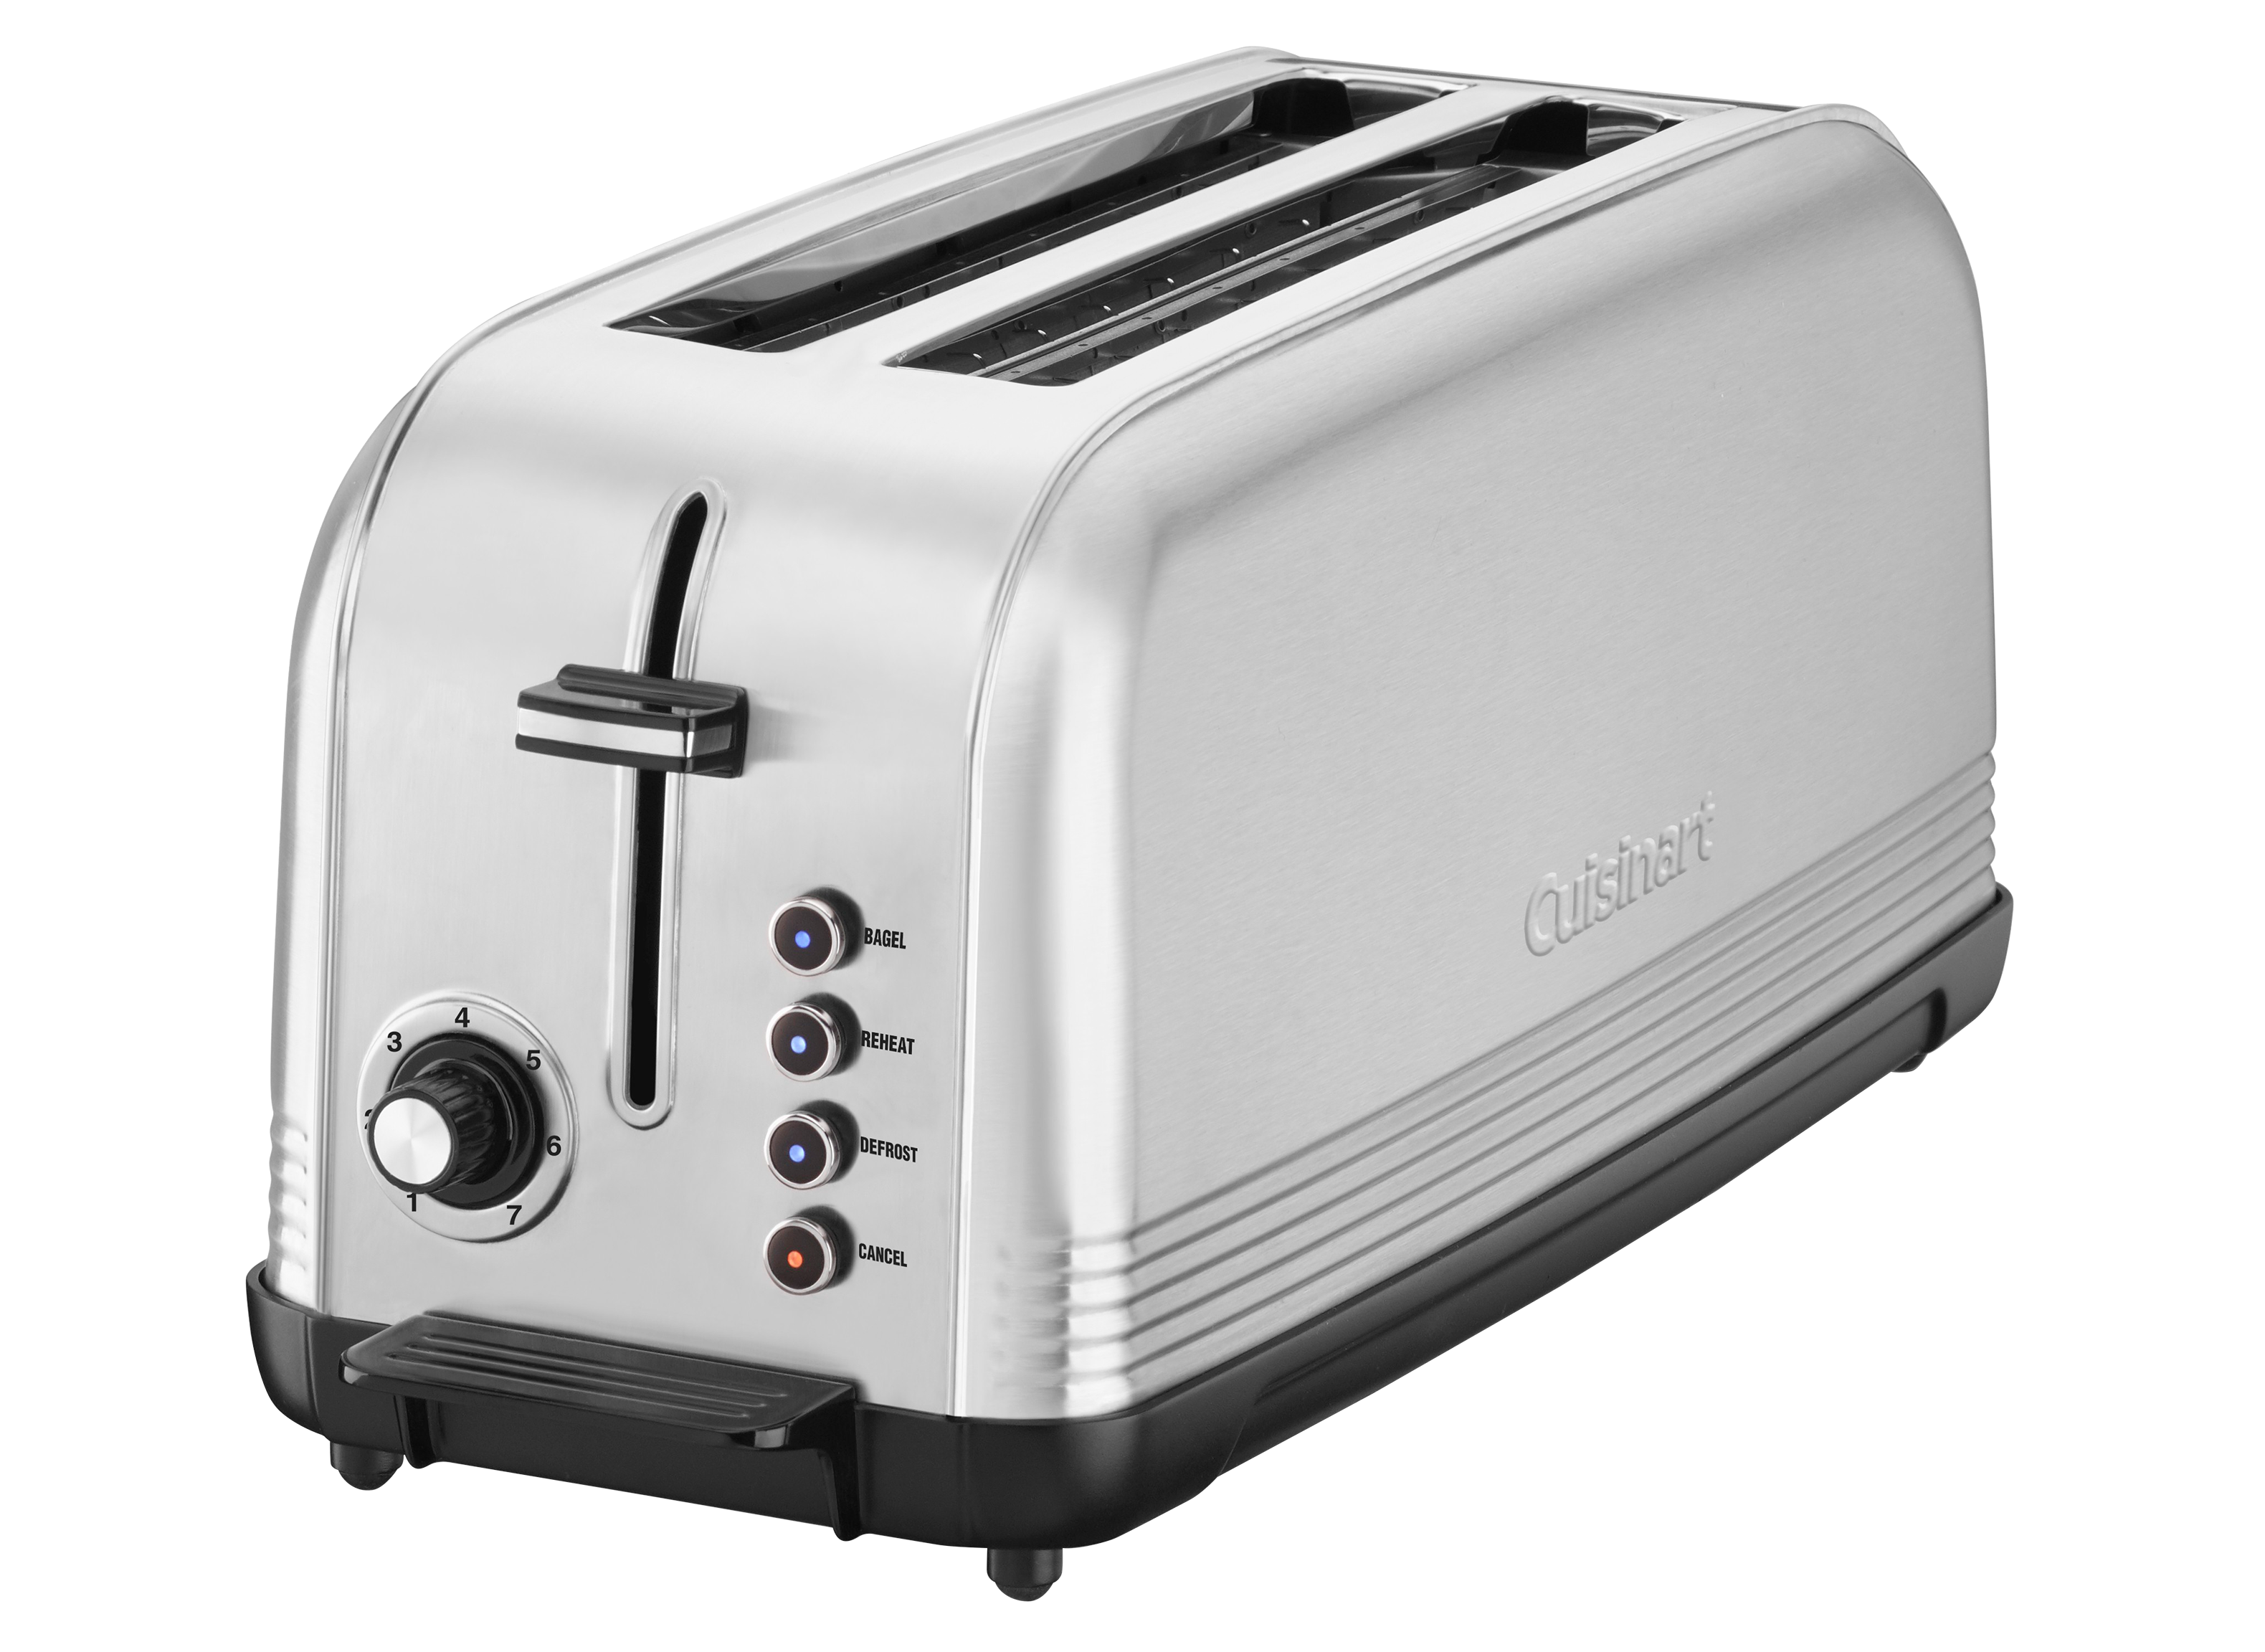 https://crdms.images.consumerreports.org/prod/products/cr/models/403714-2-slice-toasters-cuisinart-long-slot-cpt-2500-10020087.png